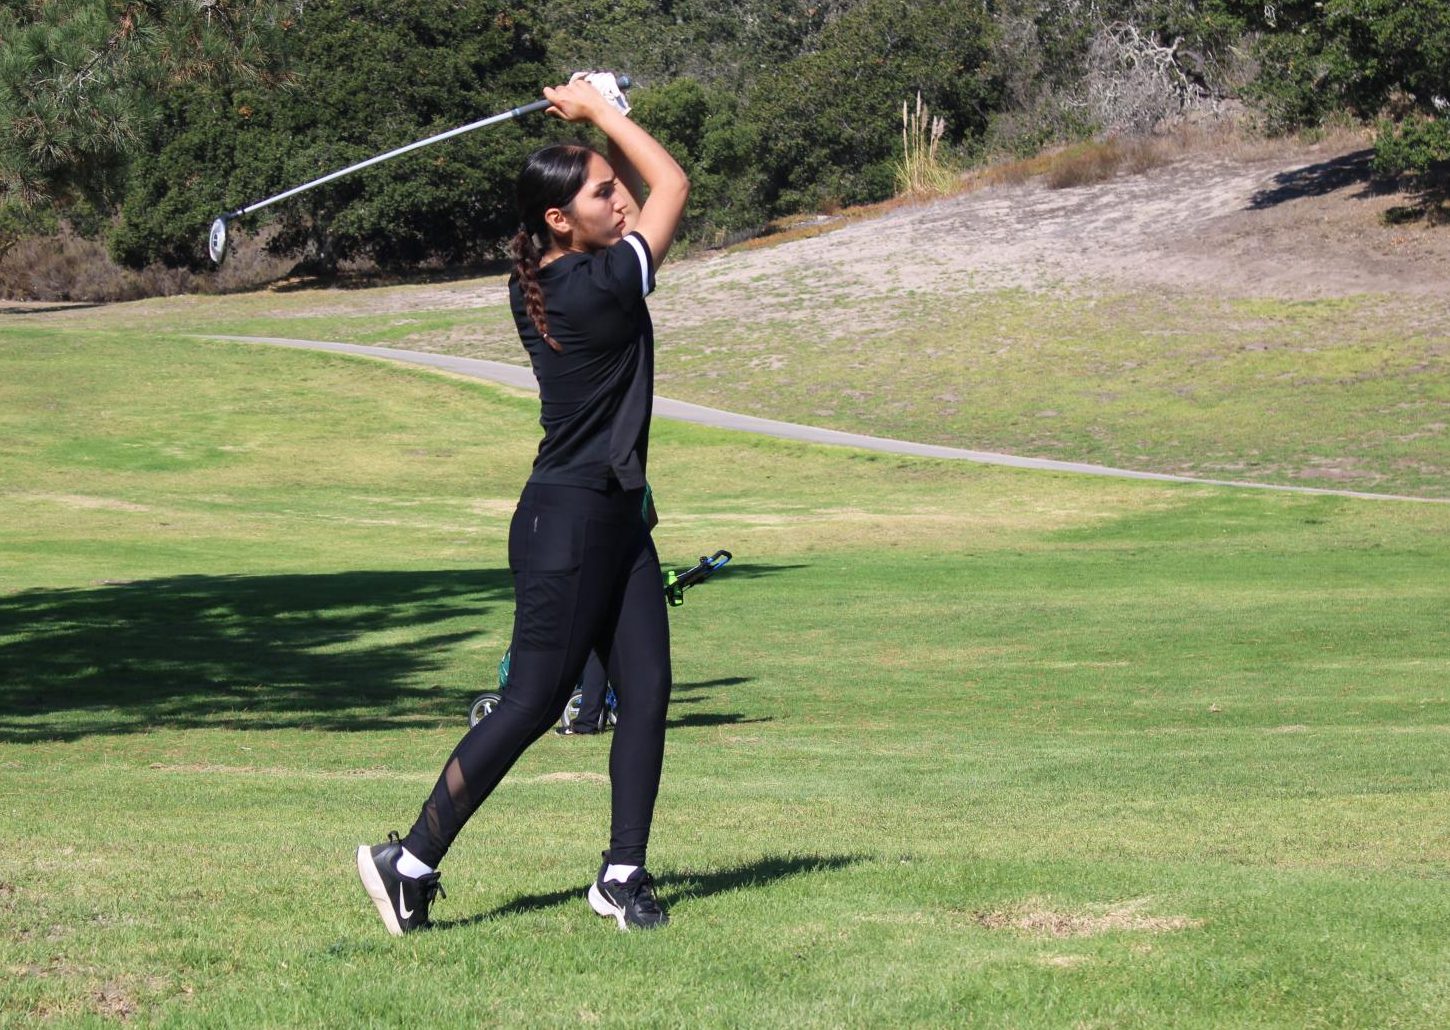 At the PCAL Championship, senior Ilana Mendez hits a drive on the 13th hole at Laguna Seca golf course. The team would place 1st in the Mission Division with a score of 628, and finish 8th overall. “I’m definitely proud of my team because we have a lot of new players and they all did amazing,” Mendez said.